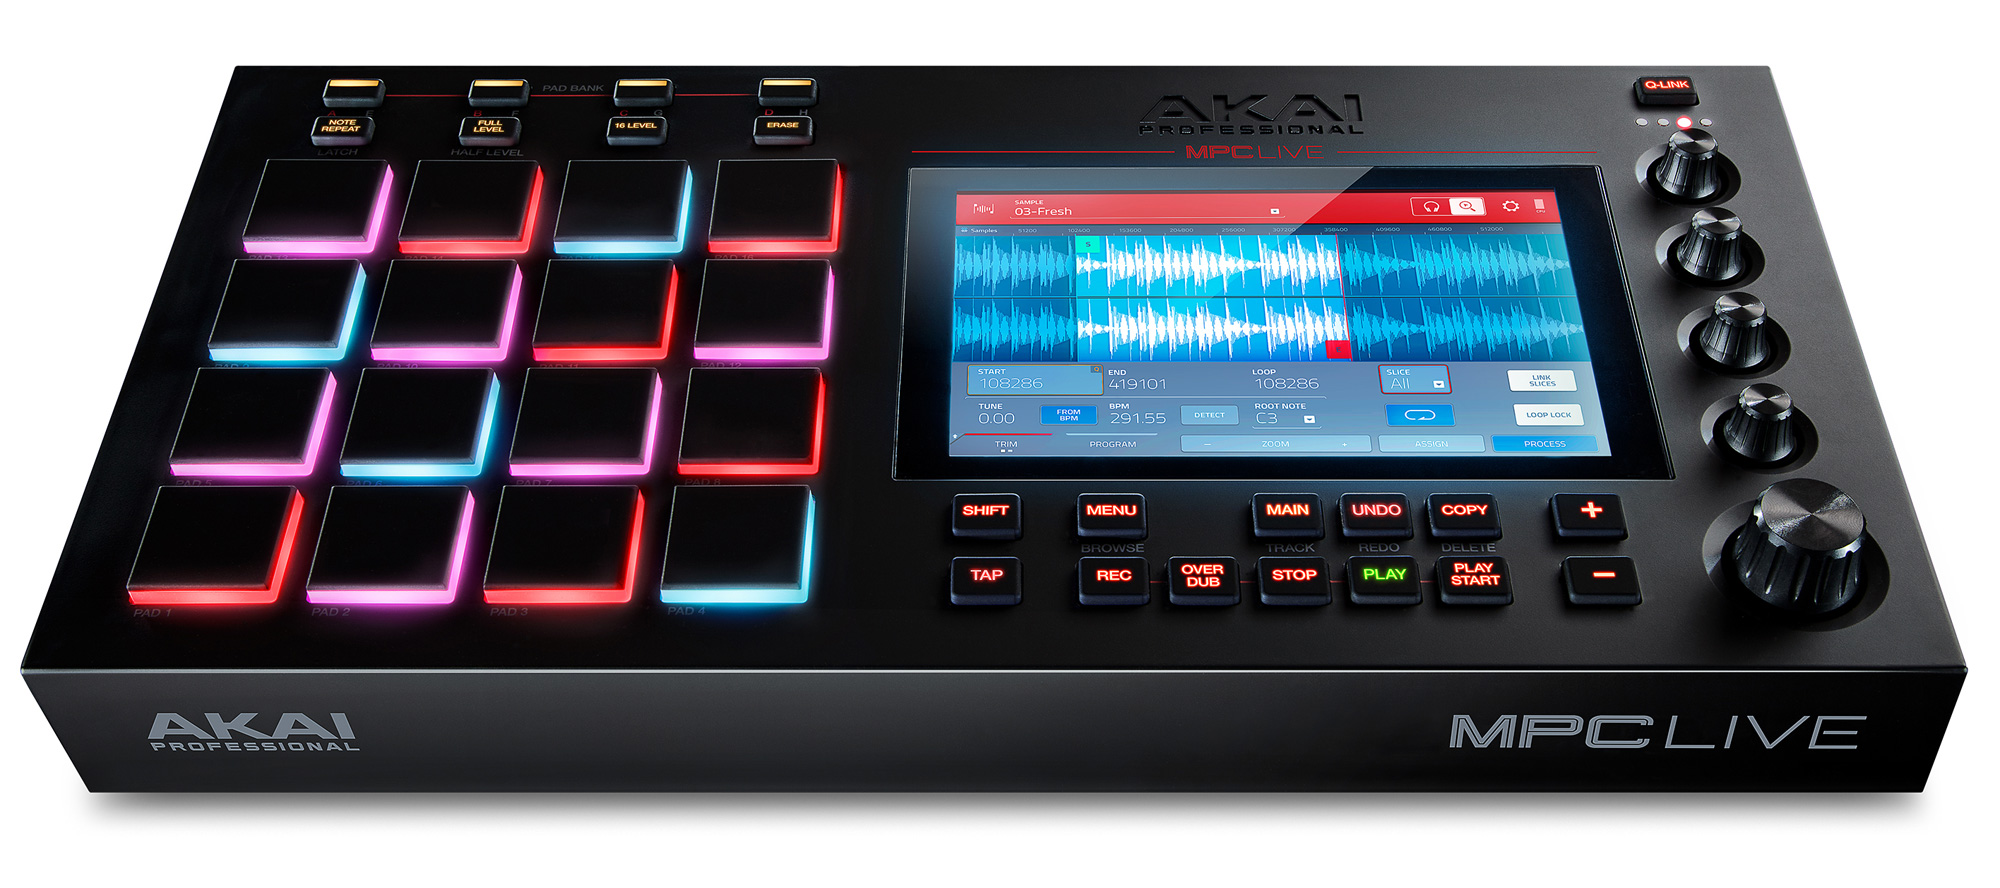 A well-conceived, efficient and inspiring device - Reviews Akai MPC